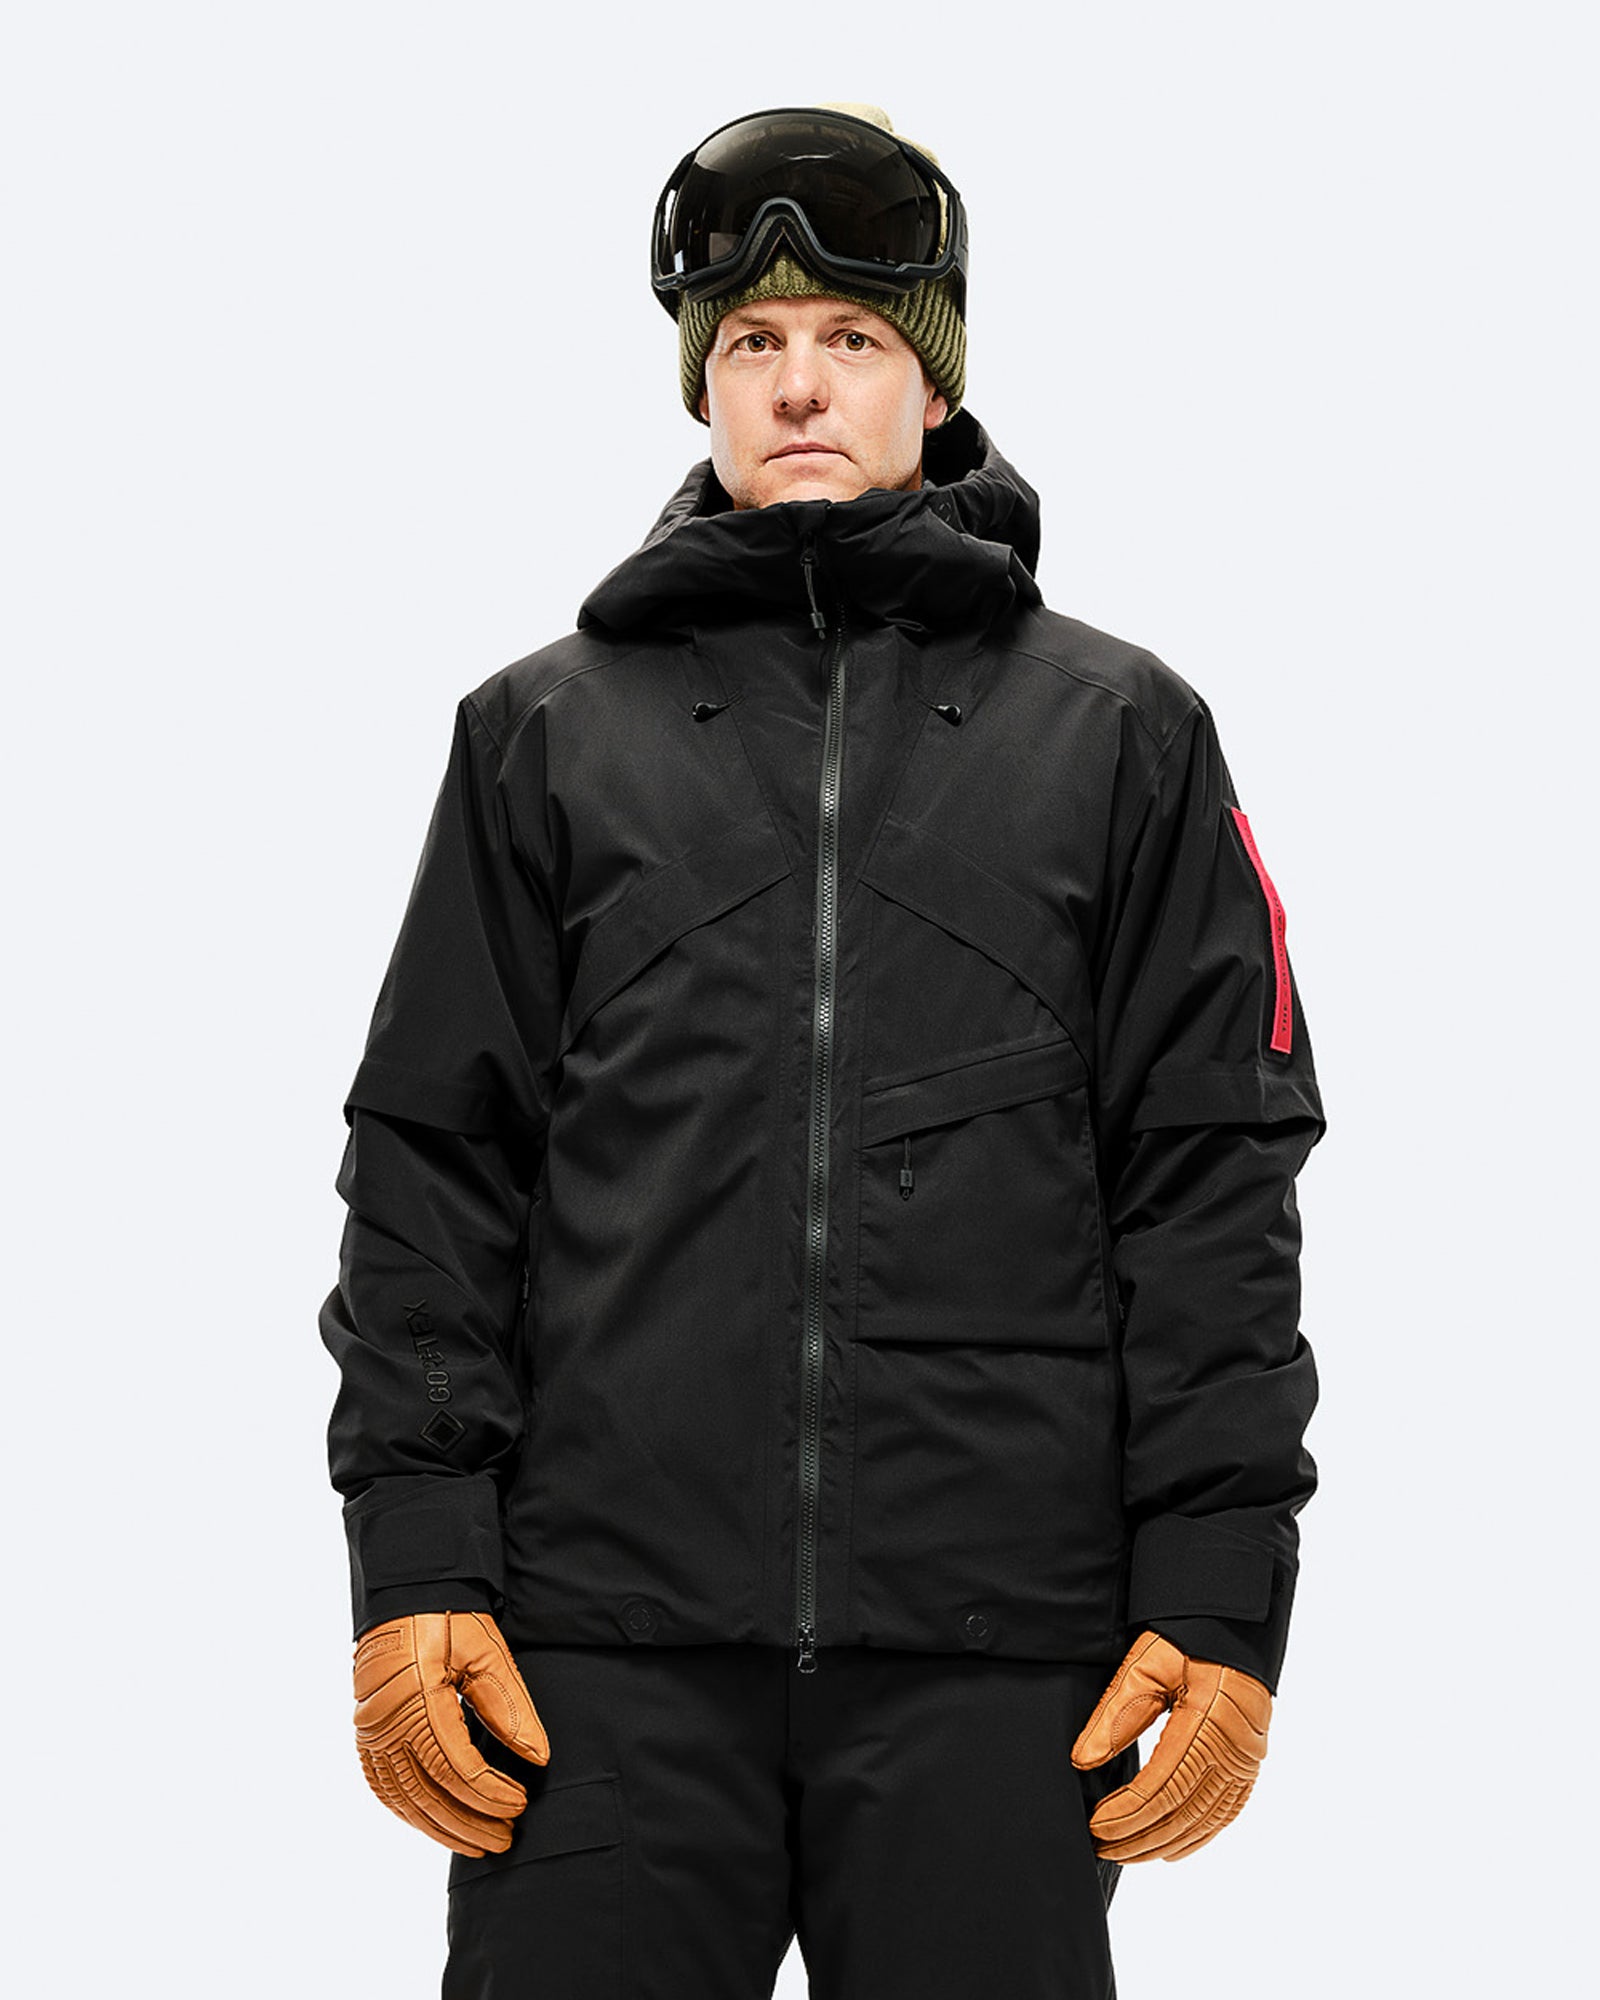 GORE-TEX 2L Stretch Insulated Jacket – S-1 | Shop now